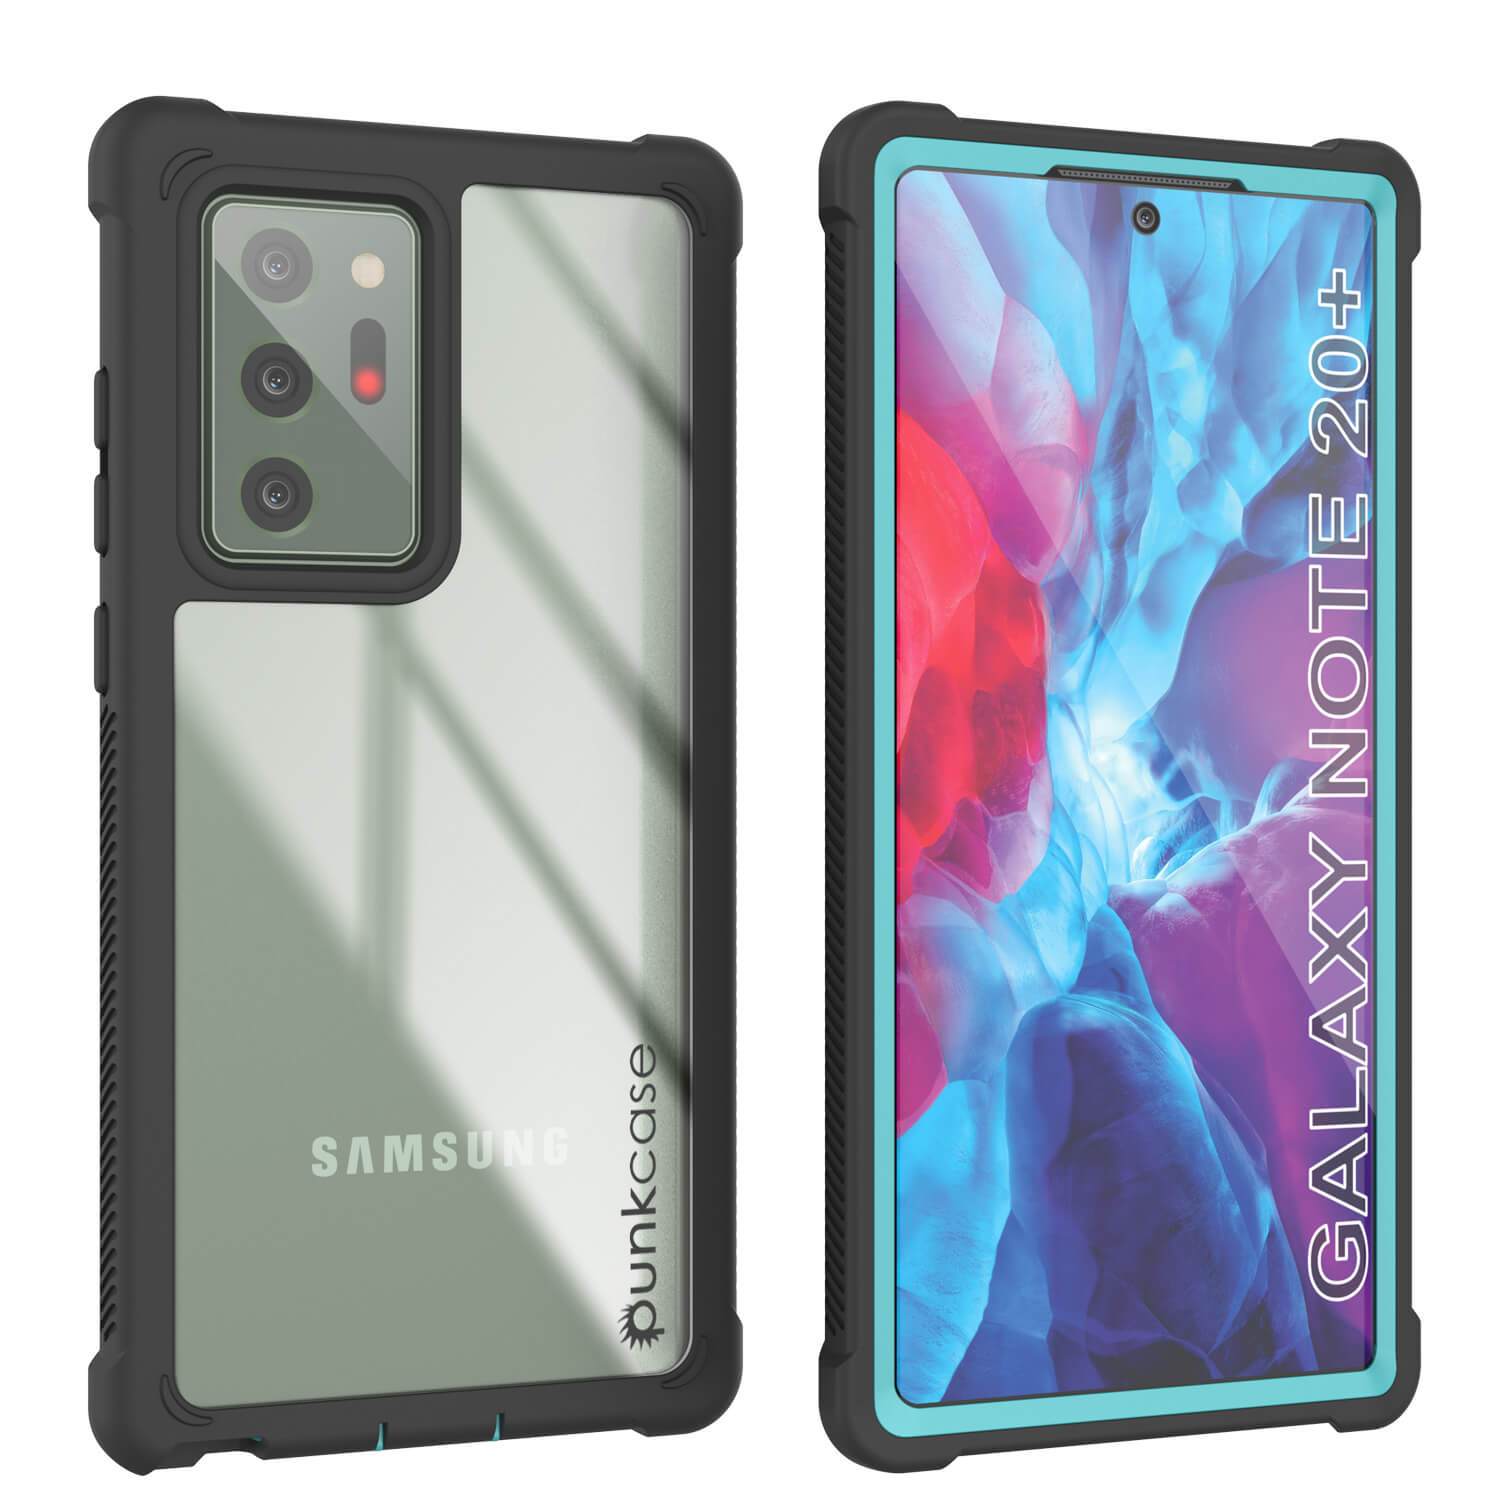 Punkcase Galaxy Note 20 Ultra Case, [Spartan Series] Teal Rugged Heavy Duty Cover W/Built in Screen Protector (Color in image: Teal)